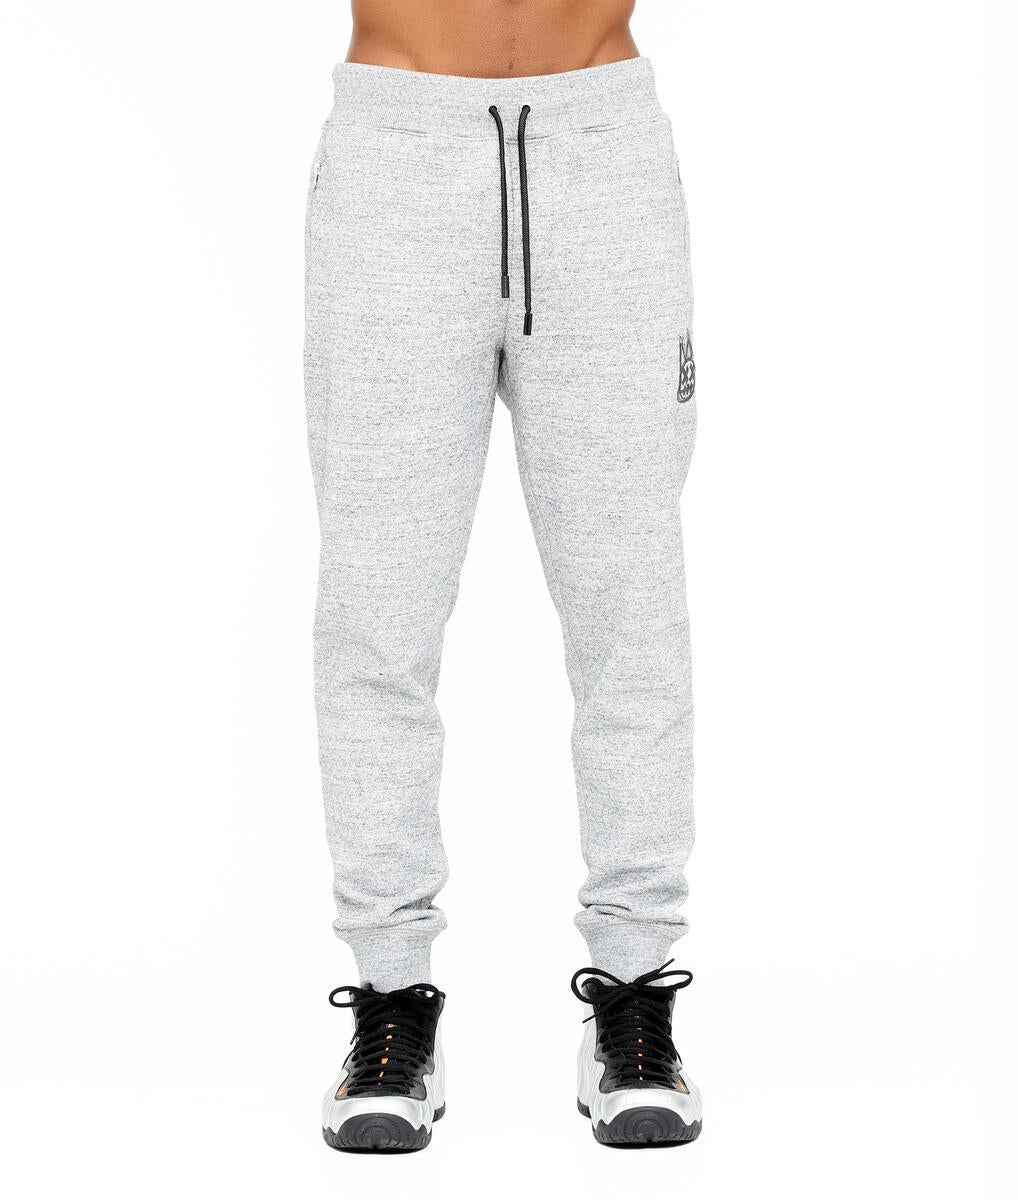 CULT OF INDIVIDUALITY SWEATPANT IN HEATHER GREY